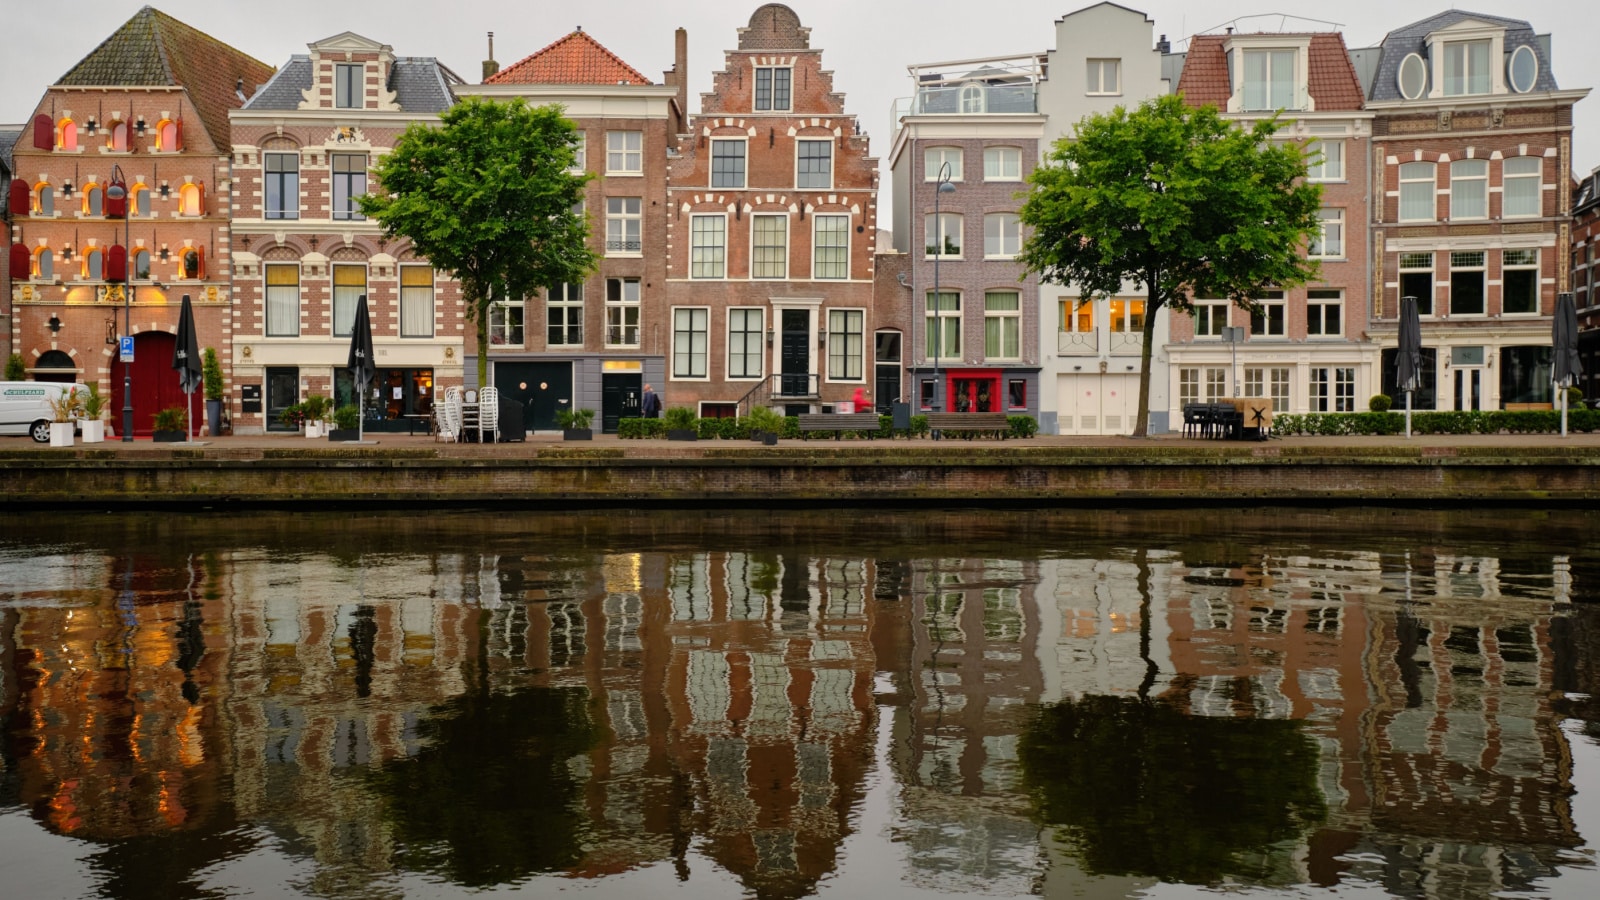 Haarlem, Netherlands - May 23. 2022: Panoramic view of traditional Dutch houses in a row lining the river Sparne in the summer.